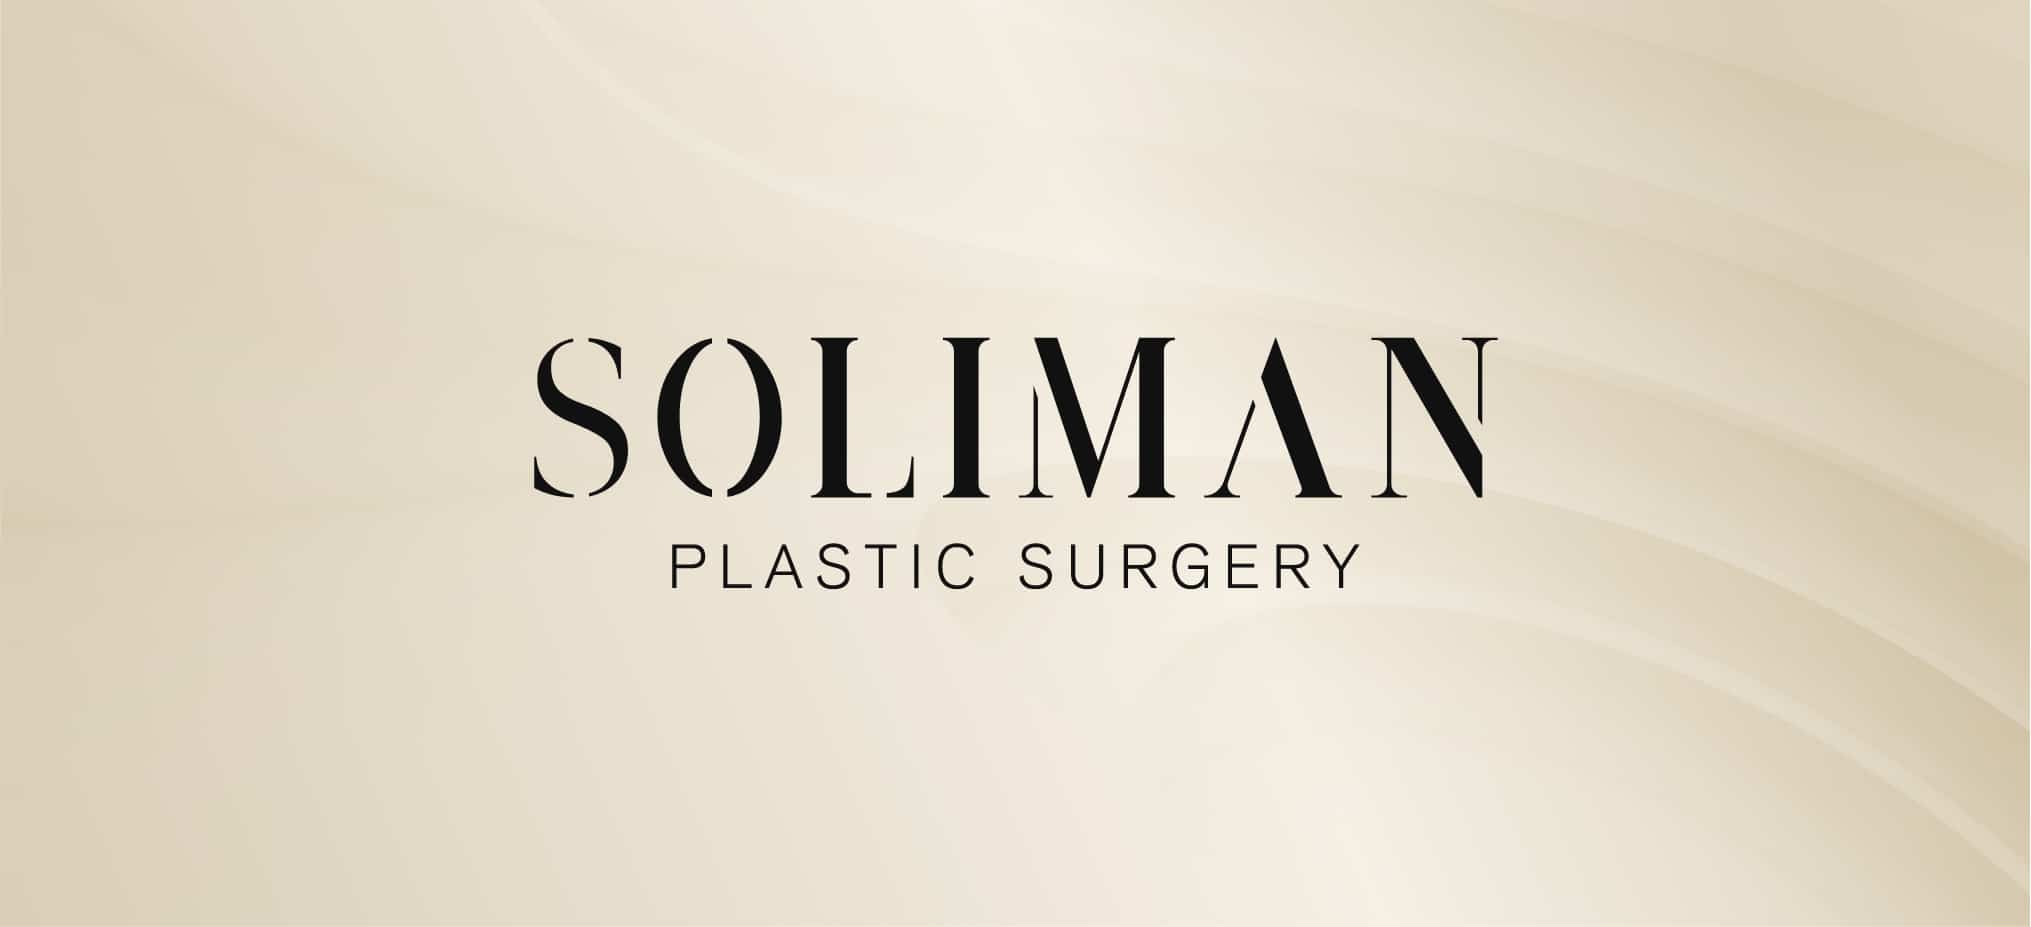 Finding The Best Plastic Surgeon in Sydney - 1